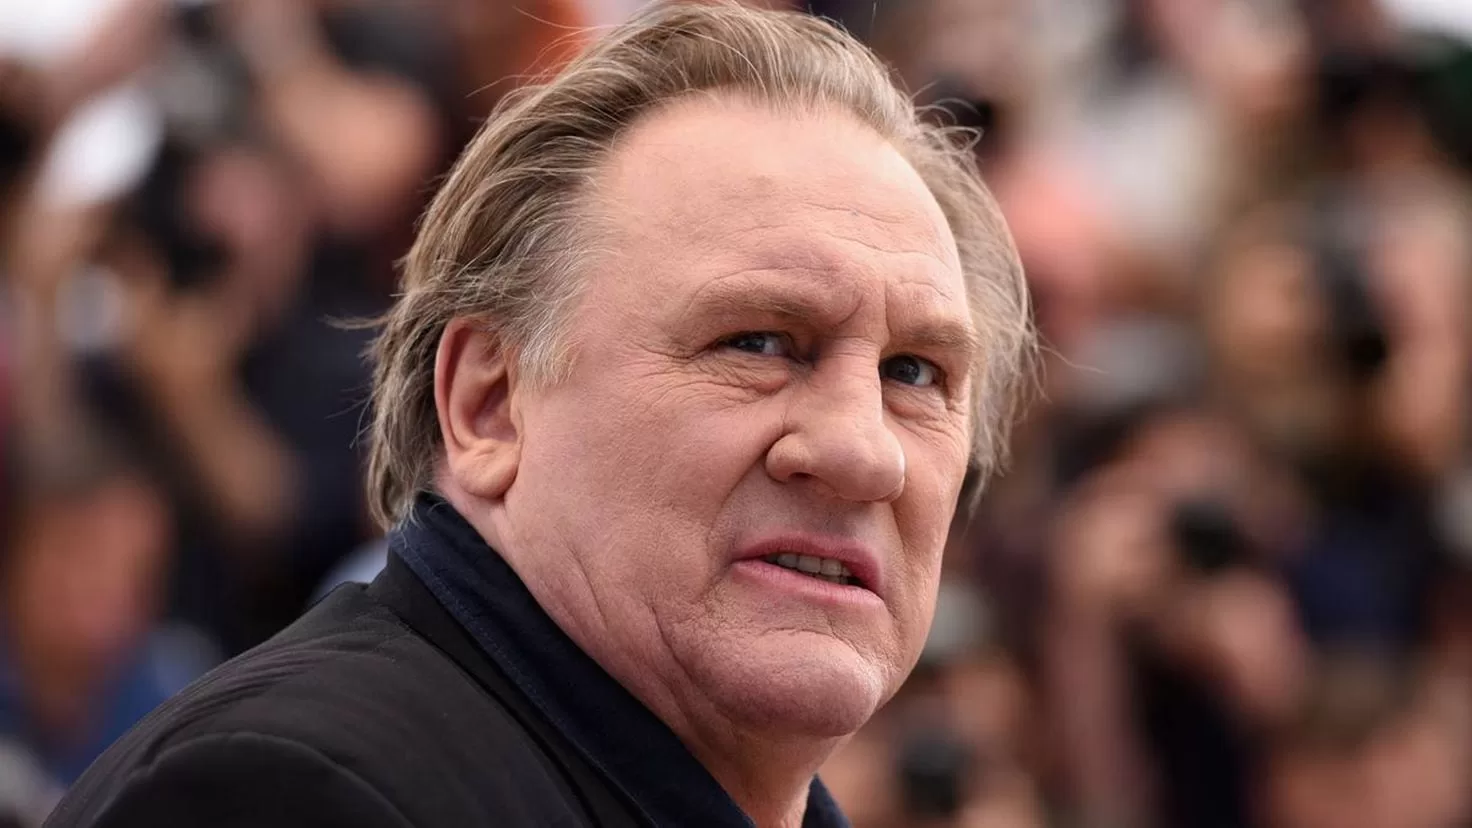 Actor Grard Depardieu receives a fourth lawsuit for sexual assault
